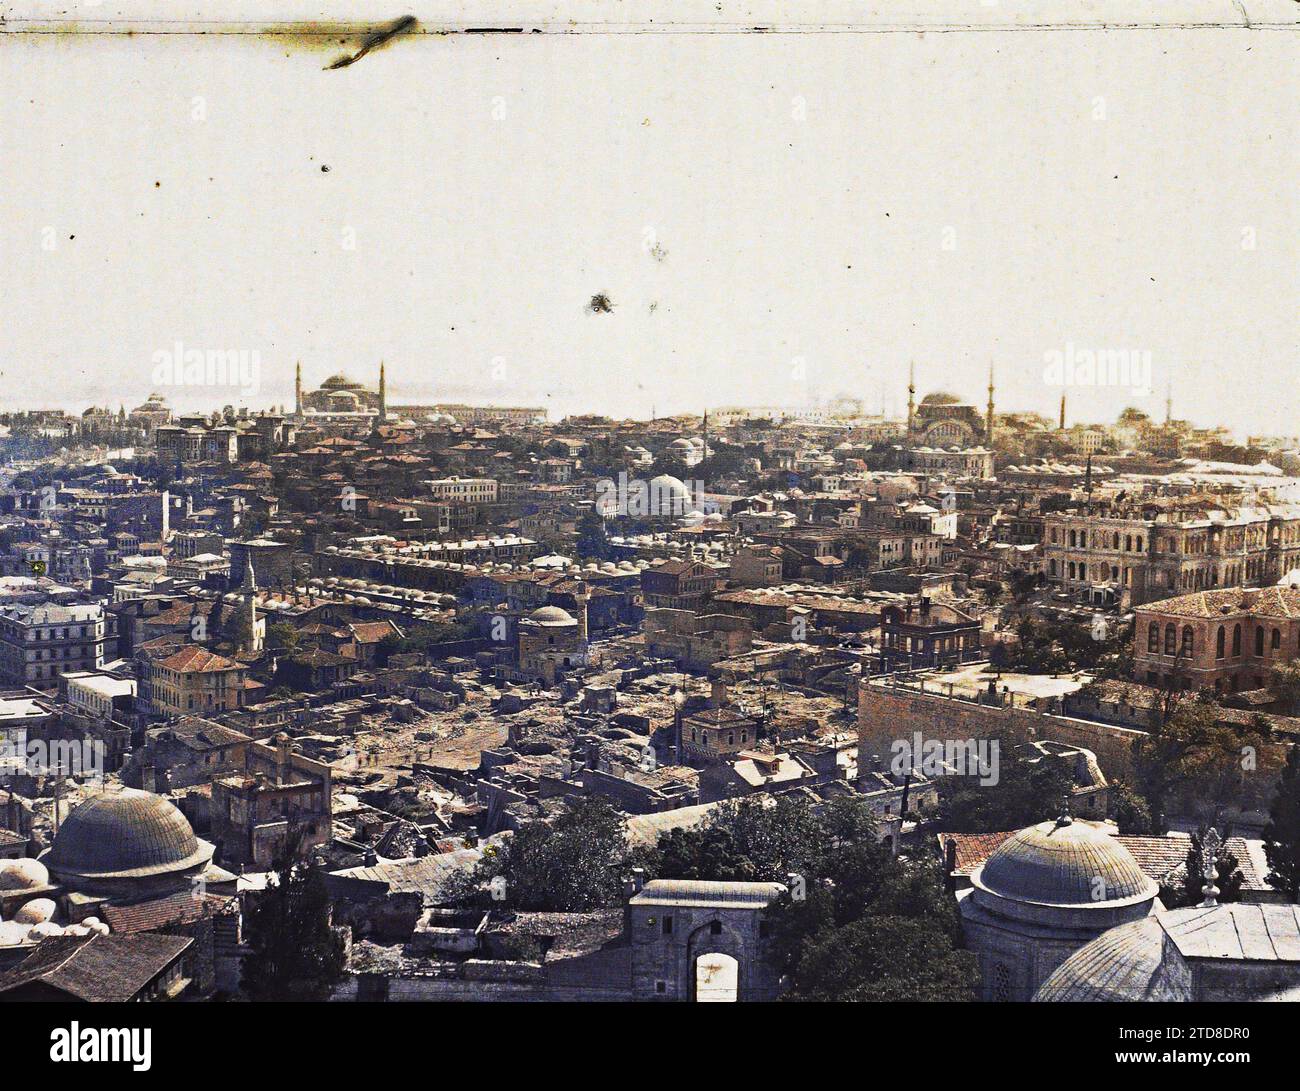 Constantinople (present-day Istanbul), Turkey Panorama taken from one of the minarets of Süleymaniye Camii ('Sultan Suleiman the Magnificent Mosque') towards the east, Religion, Habitat, Architecture, Islam, Mosque, Panorama of urban area, Religious architecture, Turkey, Constantinople, A district of Stamboul, Istanbul, 01/09/1912 - 30/09/1912, Passet, Stéphane, photographer, 1912 - Turquie - Stéphane Passet - (September), Autochrome, photo, Glass, Autochrome, photo, Positive, Horizontal, Size 9 x 12 cm Stock Photo